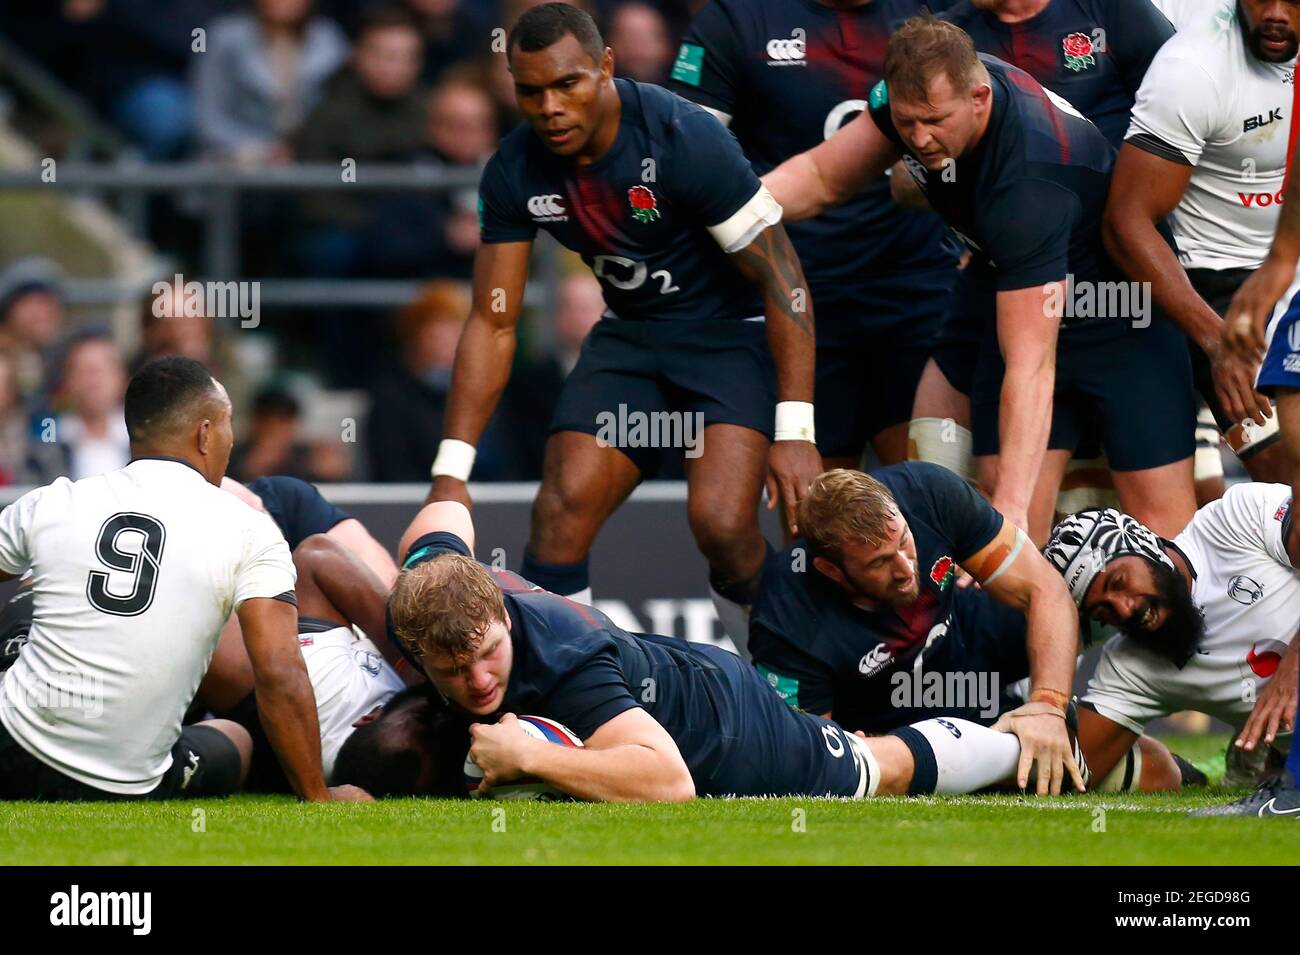 Britain Rugby Union - England v Fiji - 2016 Old Mutual Wealth Series - Twickenham Stadium, London, England - 19/11/16 England's Joe Launchbury scores a try Reuters / Andrew Winning Livepic EDITORIAL USE ONLY. Stock Photo